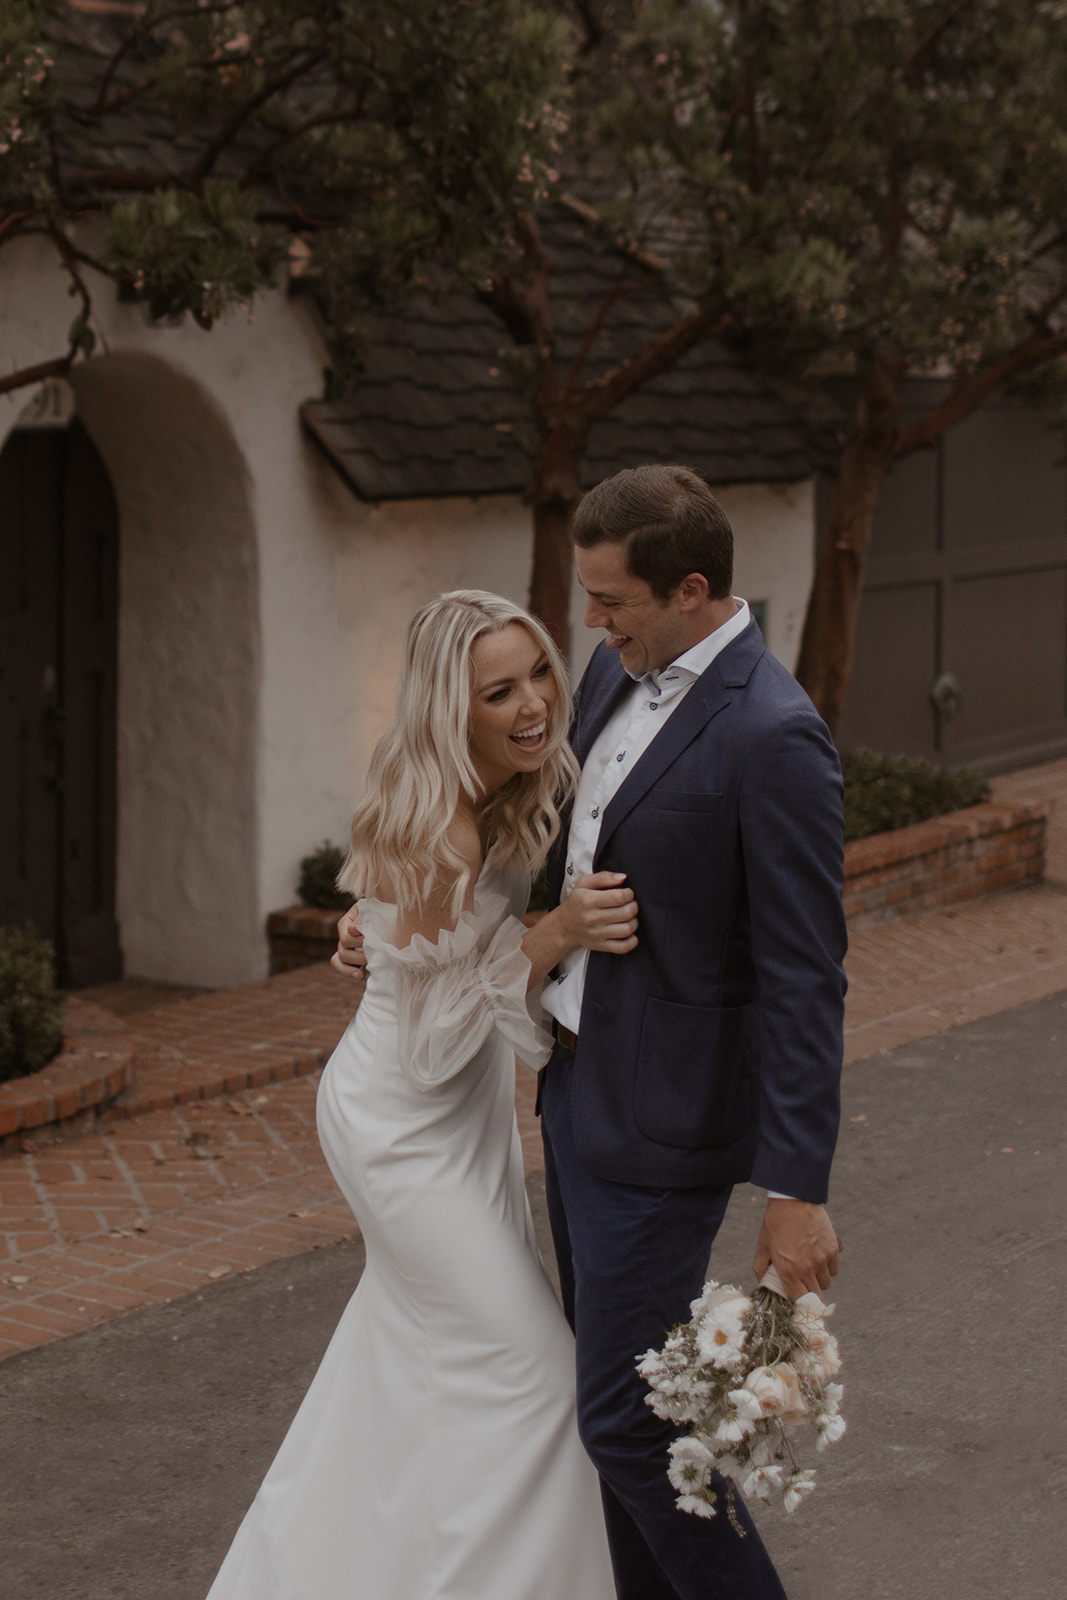 California Coast Blue Hour Elopement at Laguna Beach with bride and groom hugging while bride is holding boho wedding flowers